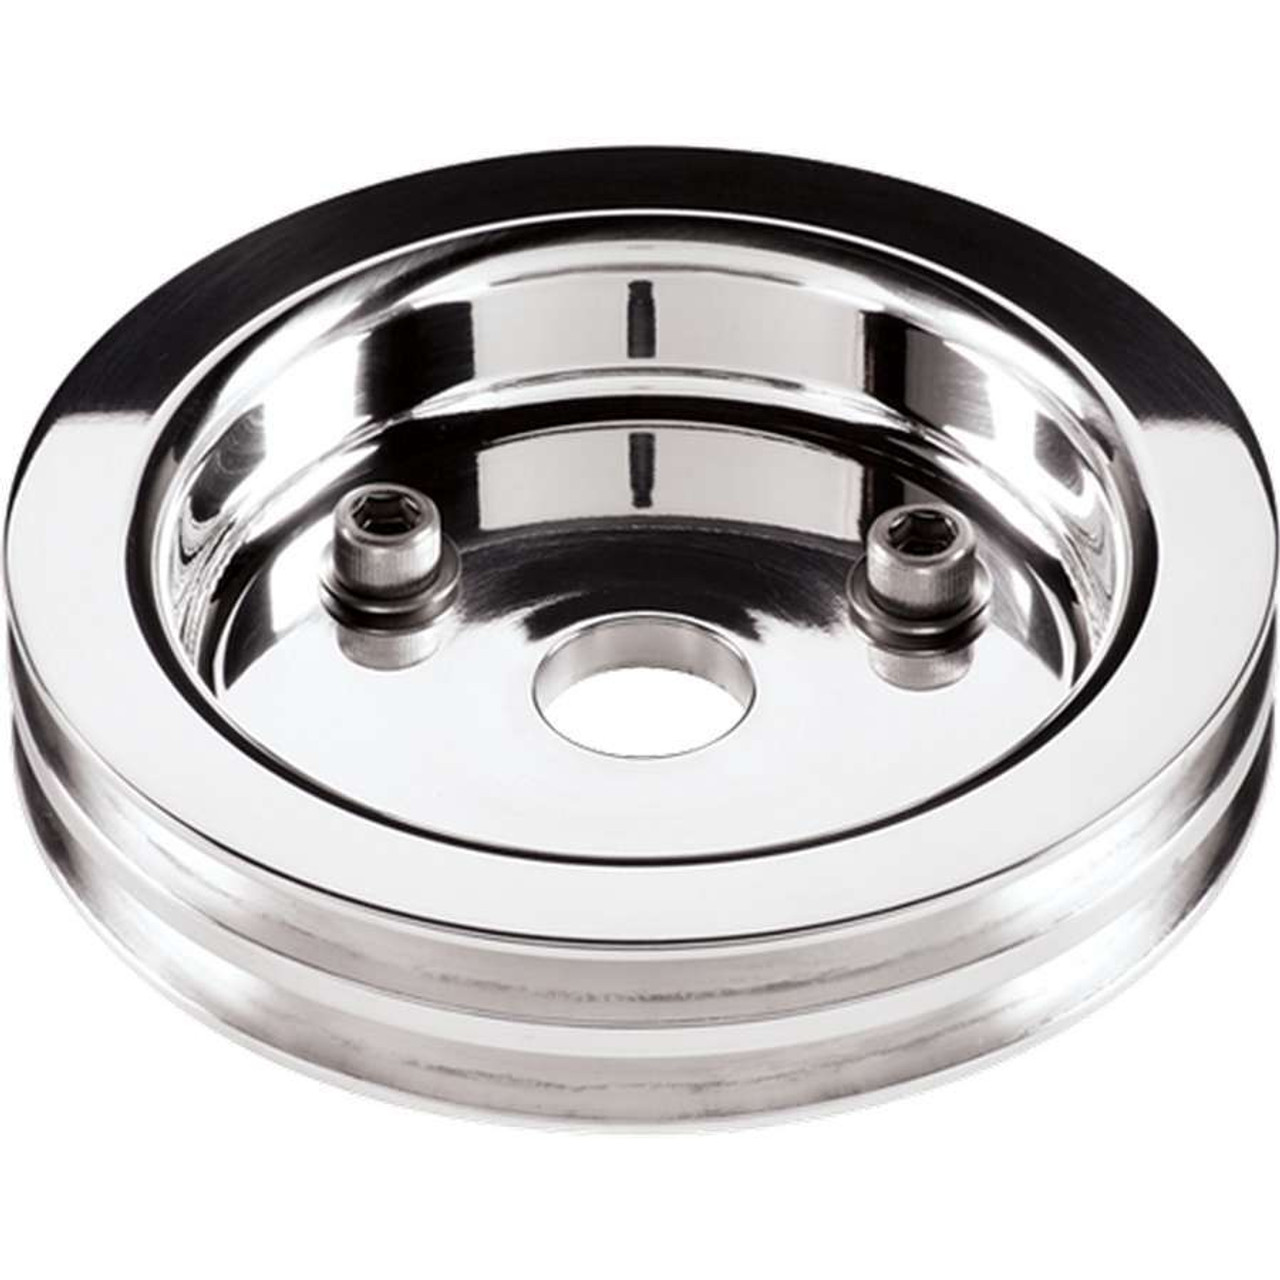 Polished SBC 2 Groove Lower Pulley